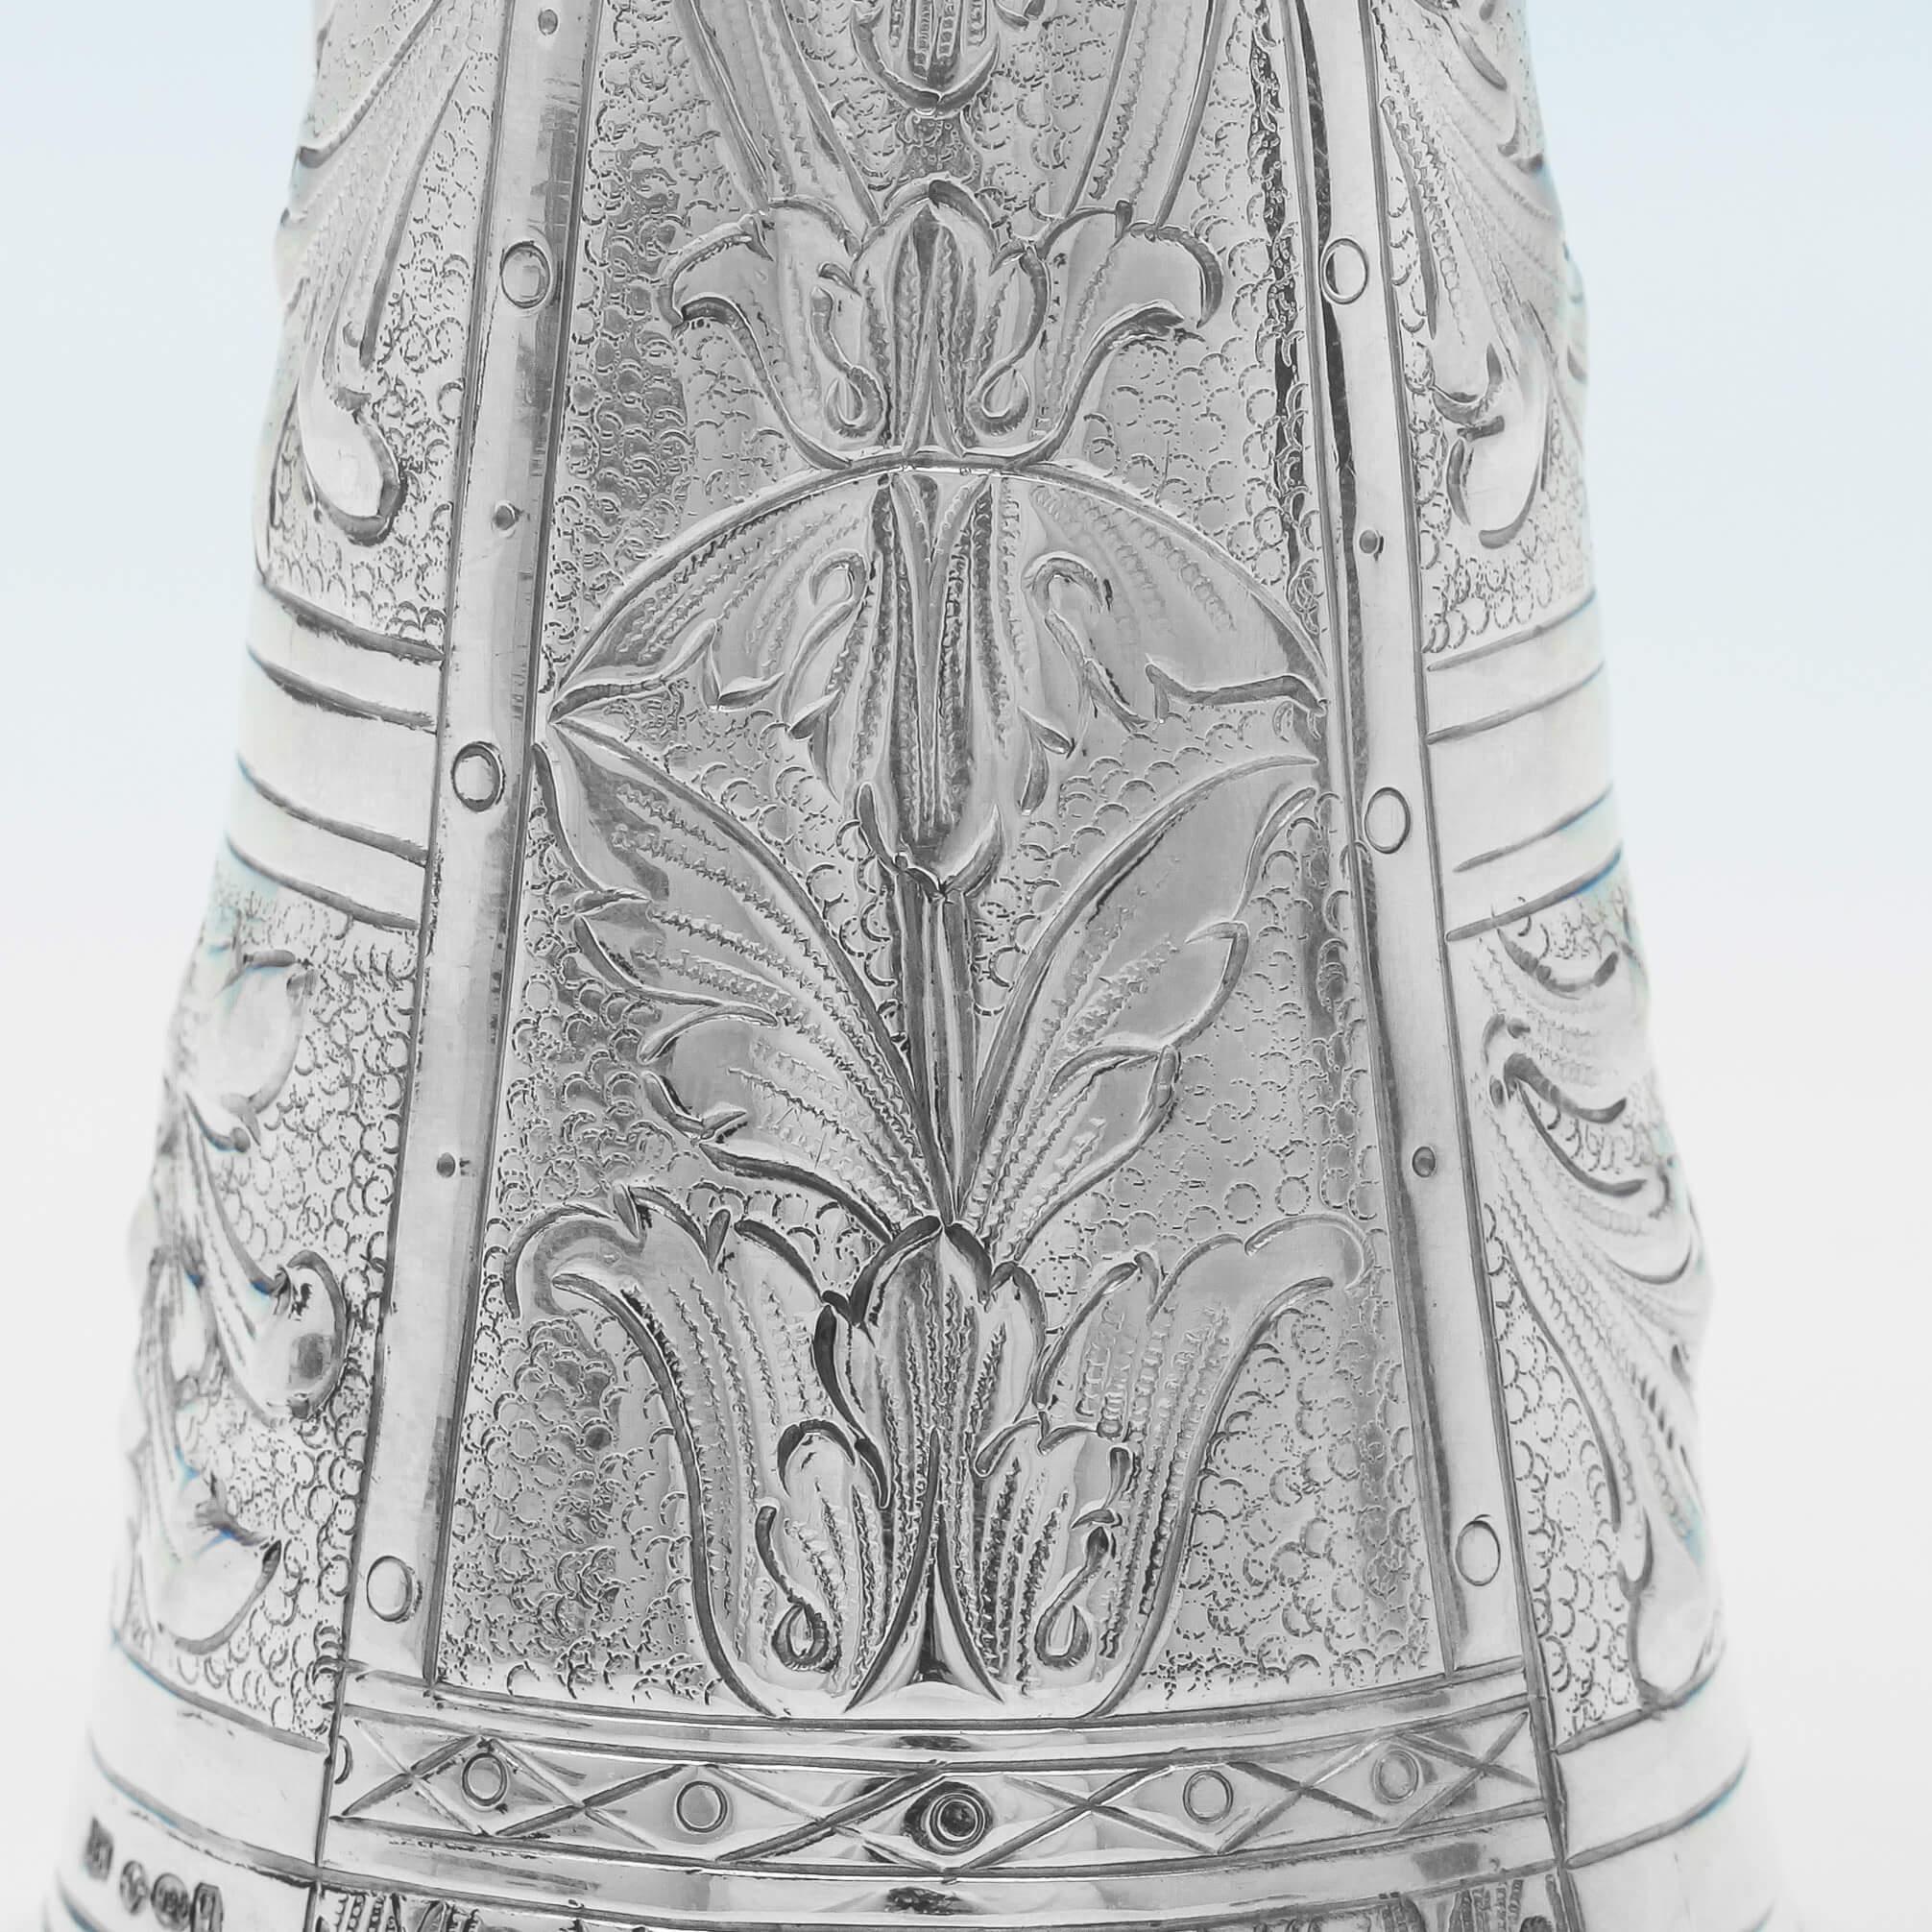 Edwardian Import Marked Novelty 'Man in Drag' Sterling Silver Wager Cup by Muller in 1911